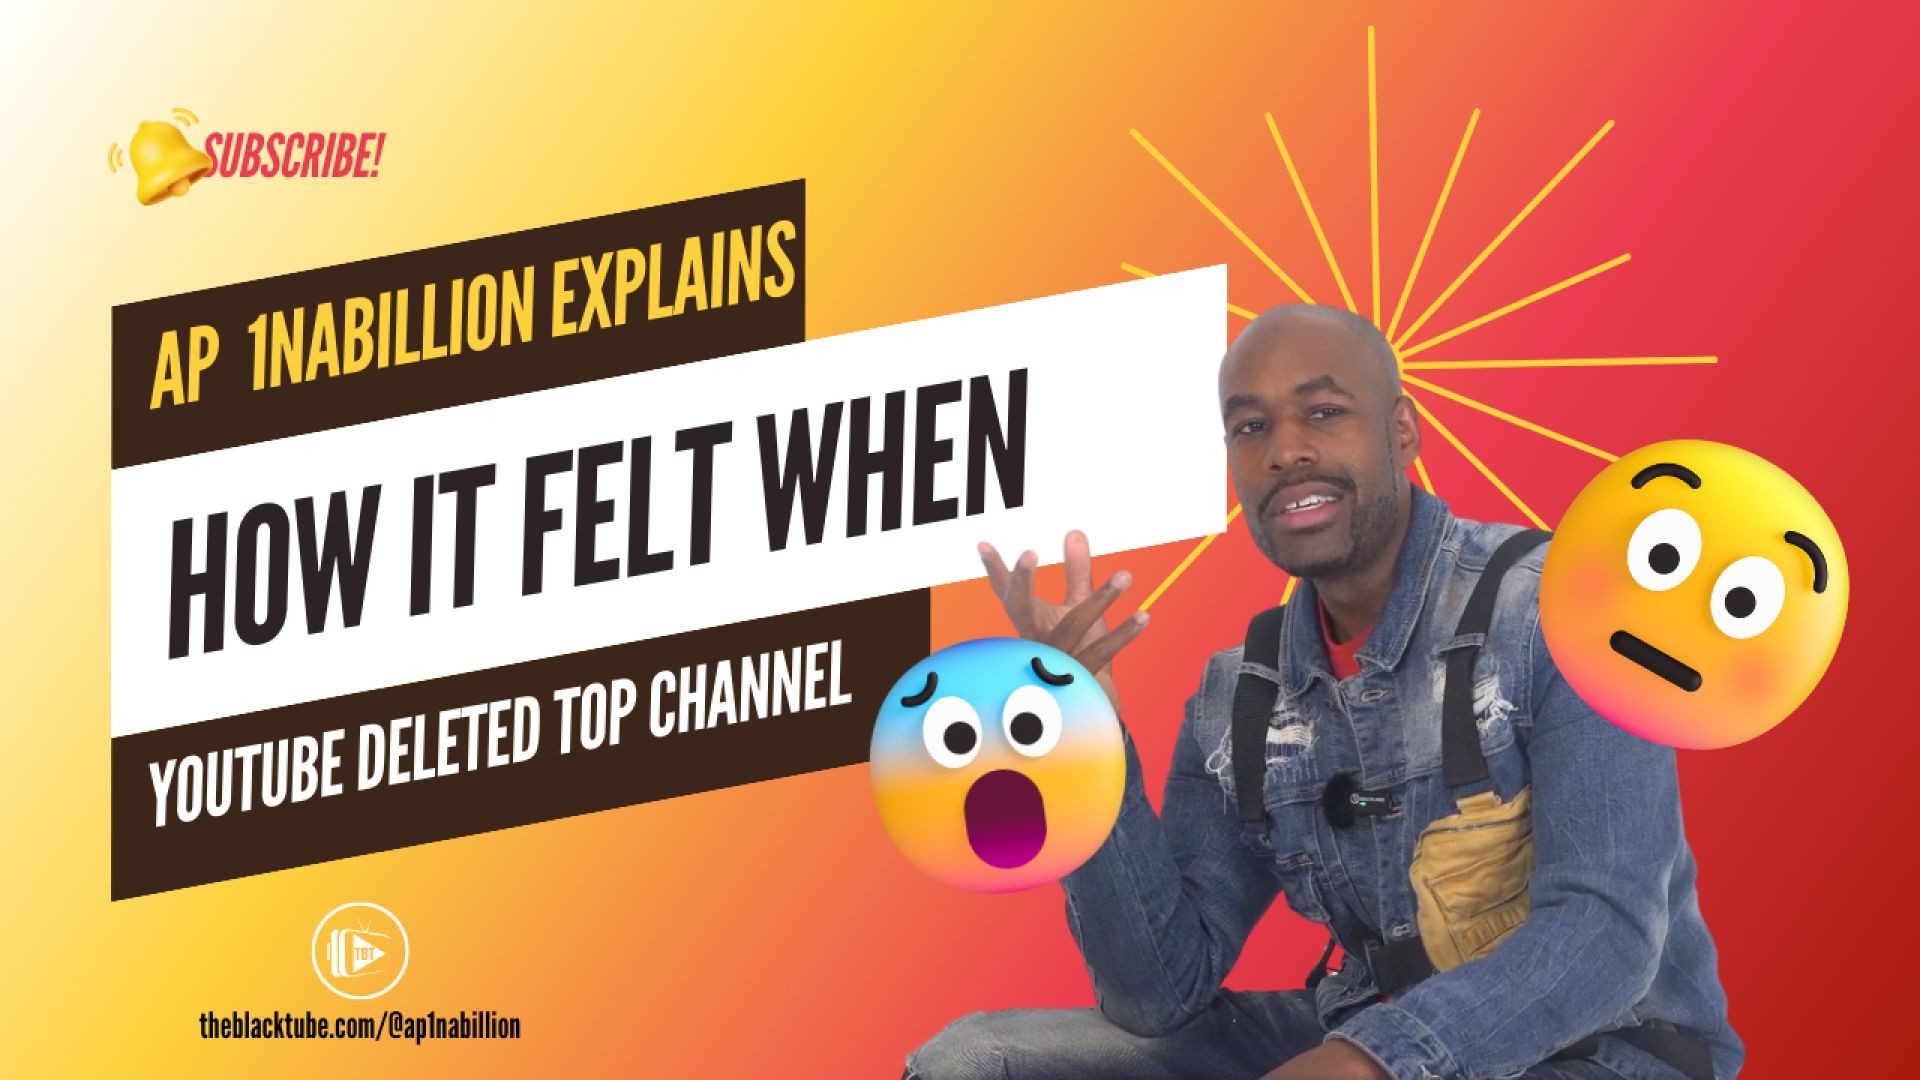 ⁣CAUGHT ON CAMERA Ap 1nabillion talks how he felt when YouTube deleted his biggest channel